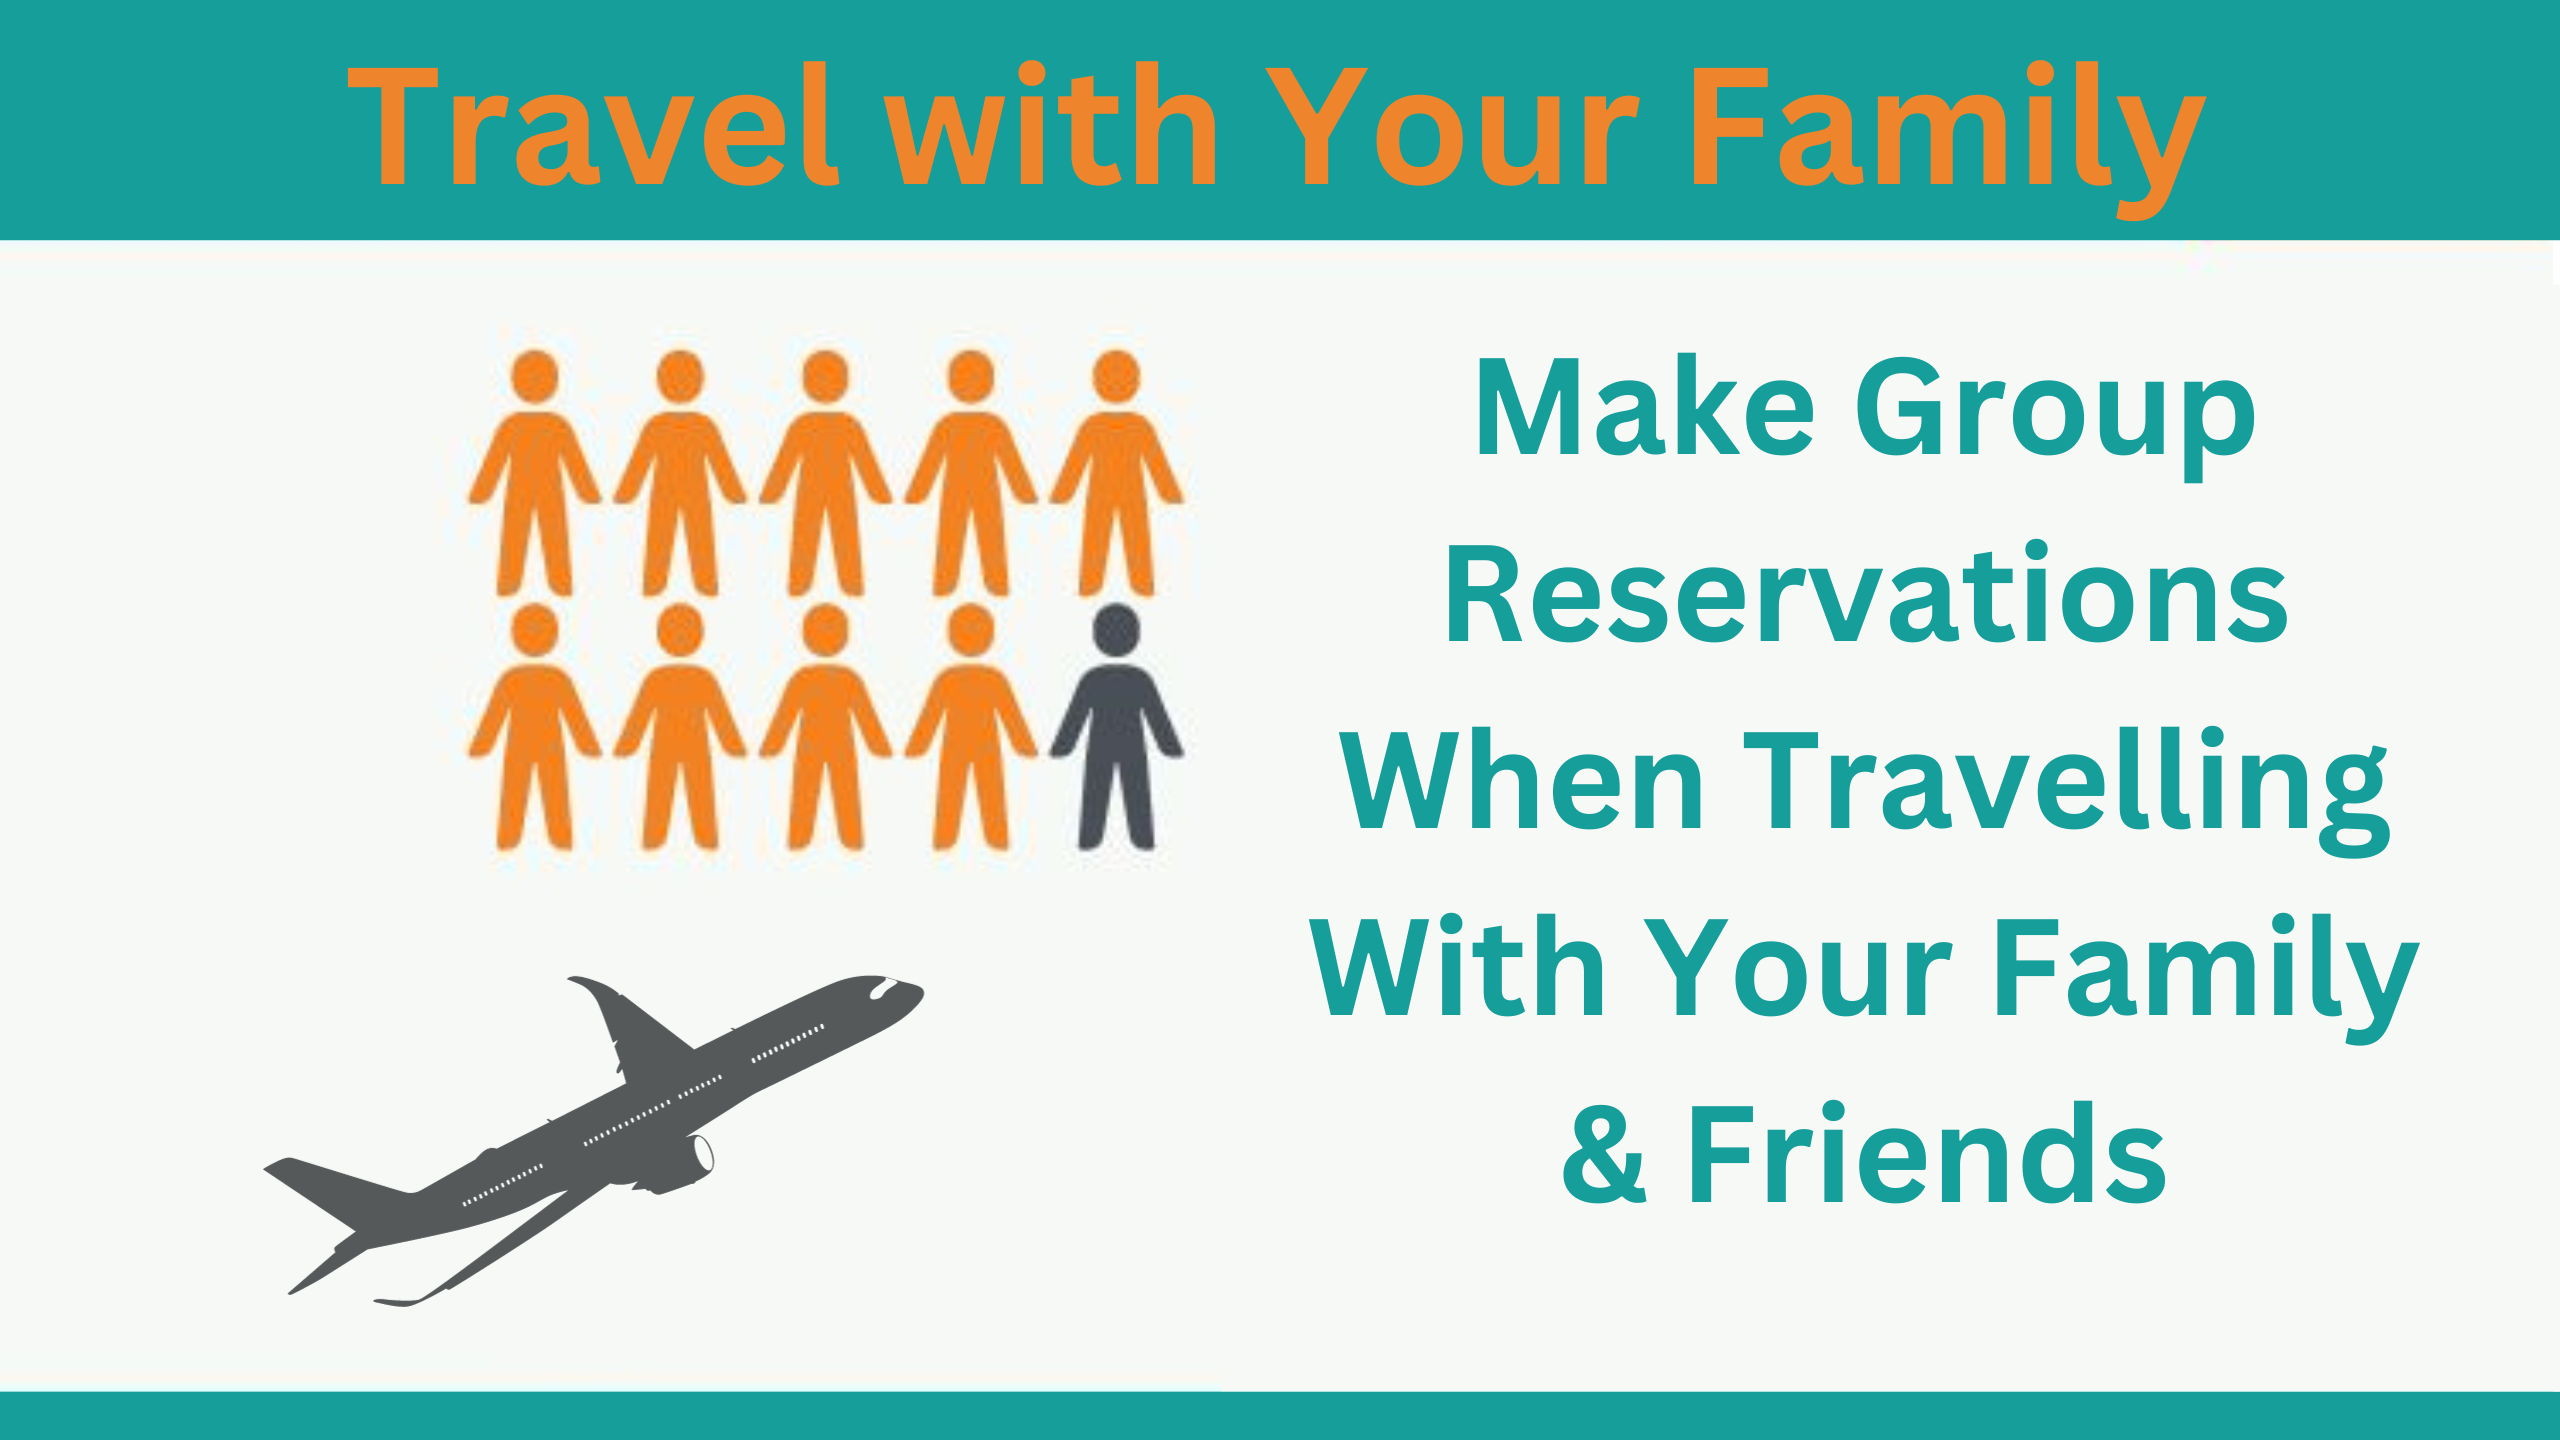 Make Group Reservations When Travelling With Your Family & Friends